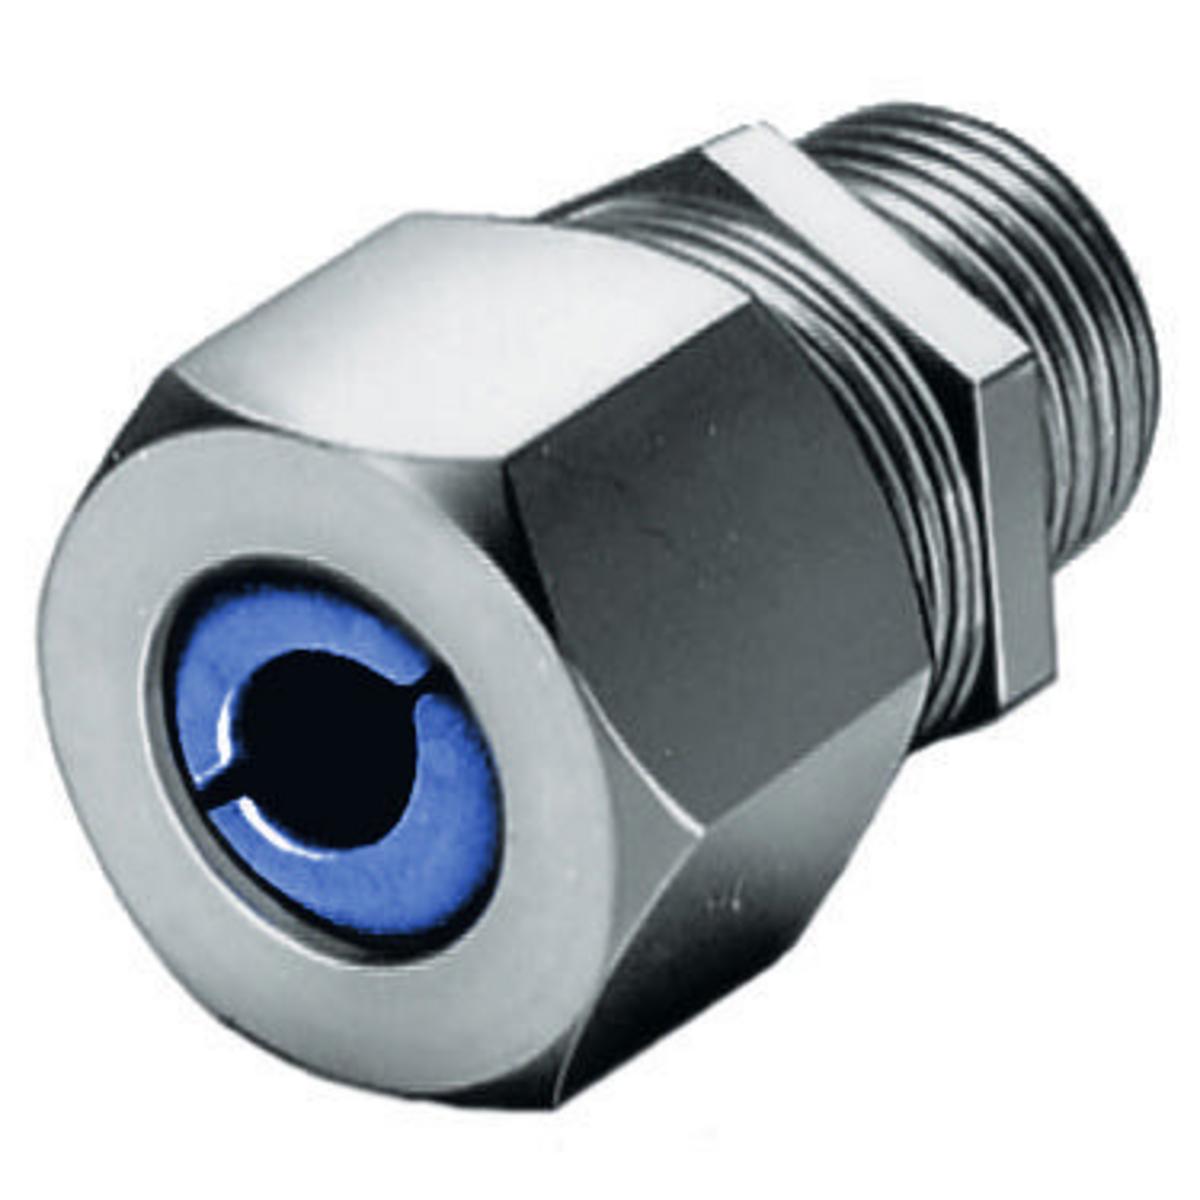 Hubbell SHC1023SS Kellems Wire Management, Cord Connectors, Straight Male, .38-.50", 1/2", Stainless Steel  ; Stainless steel cord connector provides superior strength and corrosion resistance ; Standard Product